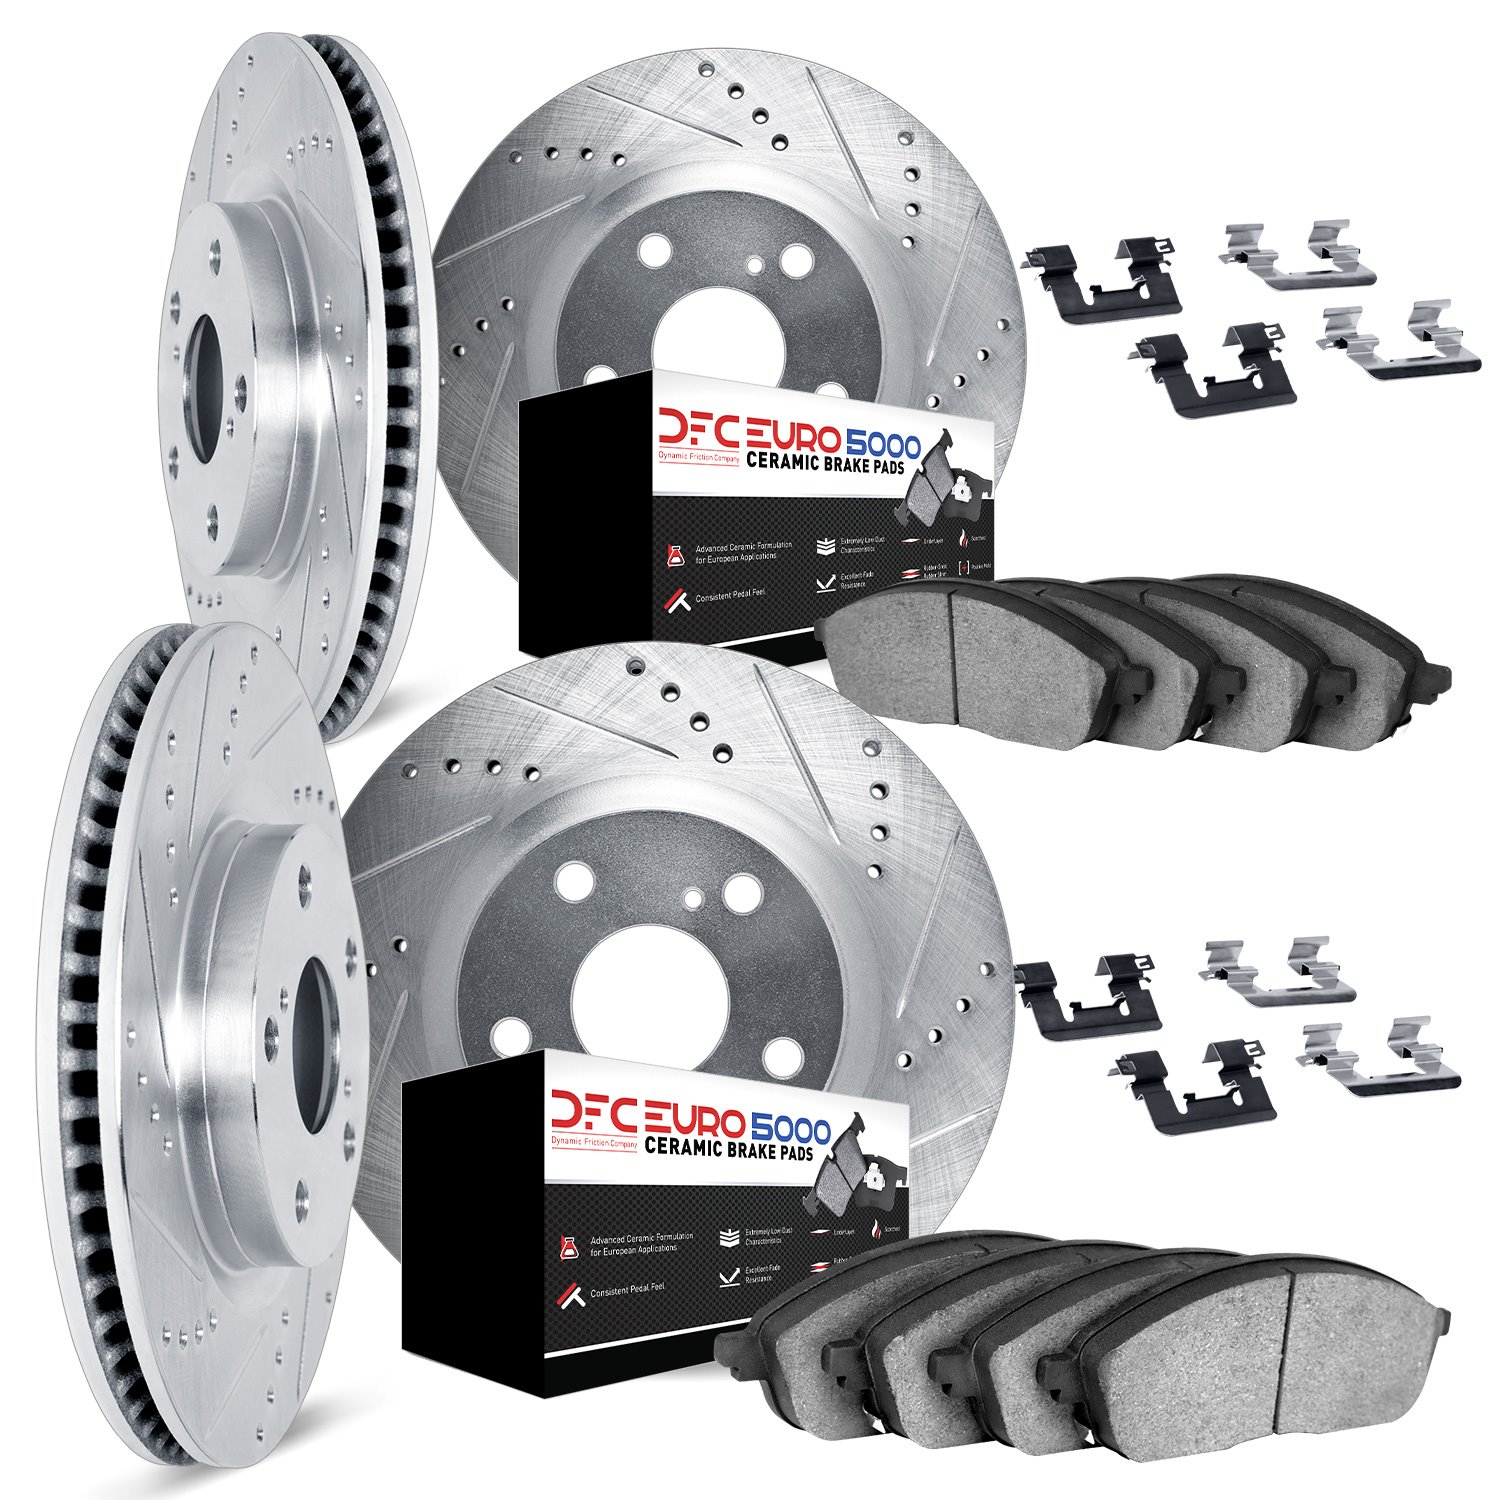 7614-31020 Drilled/Slotted Brake Rotors w/5000 Euro Ceramic Brake Pads Kit & Hardware [Silver], 2006-2006 BMW, Position: Front a